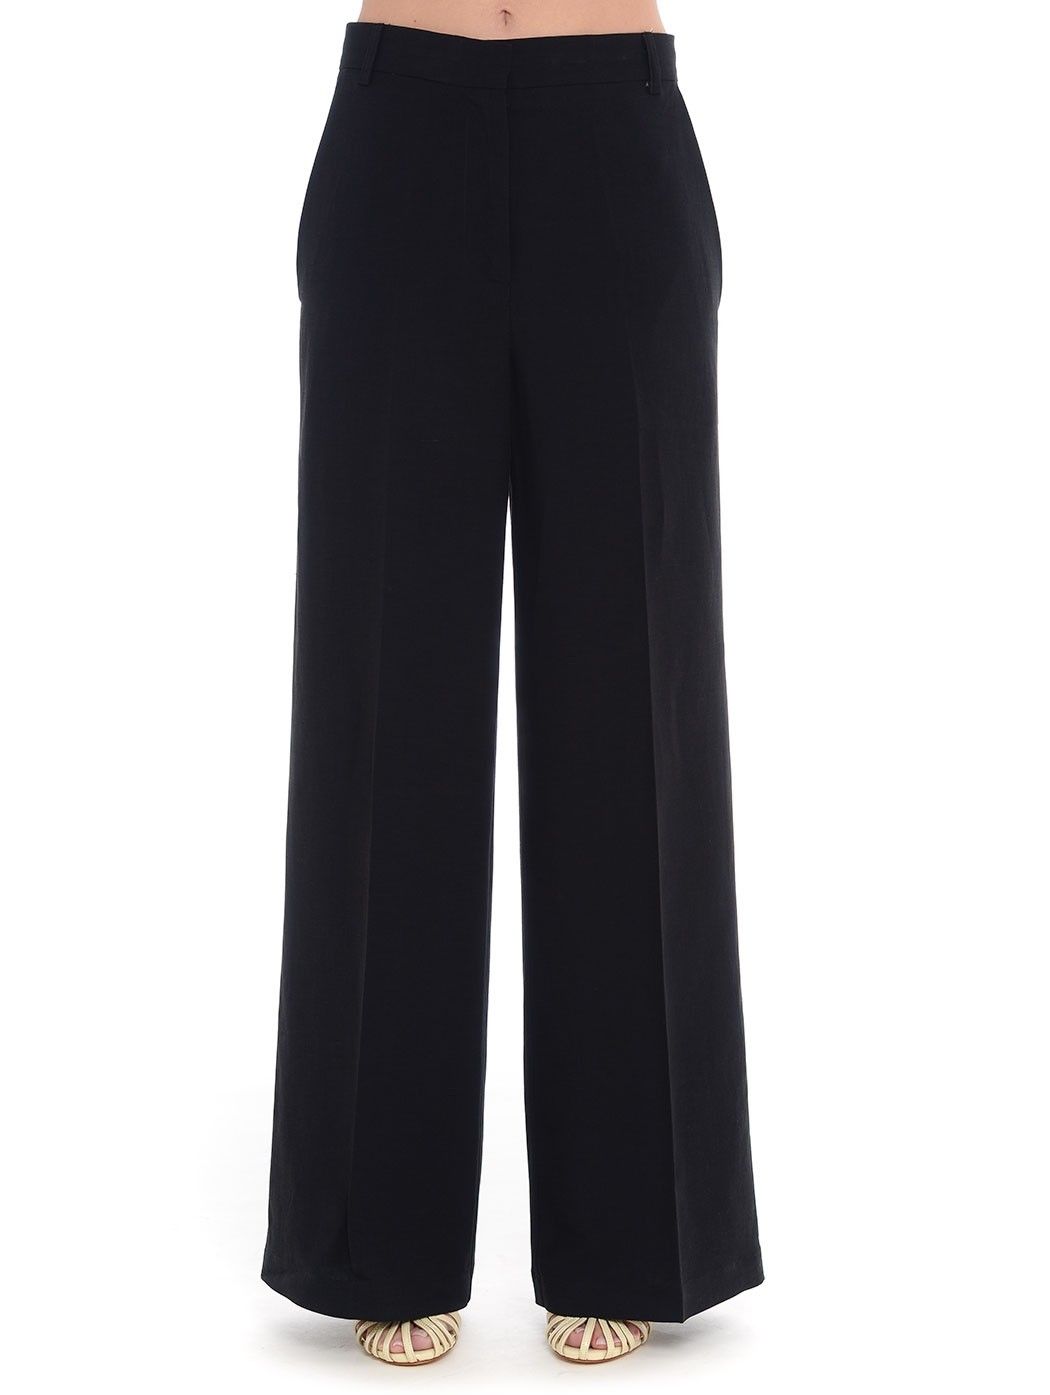  WOMAN TROUSERS,PALAZZO TROUSERS,SKINNY TROUSERS,MARNI TROUSERS,FORTE FORTE TROUSERS,8PM TROUSERS,MSGM TROUSERS,CROP PANTS  8 PM FUCSIA